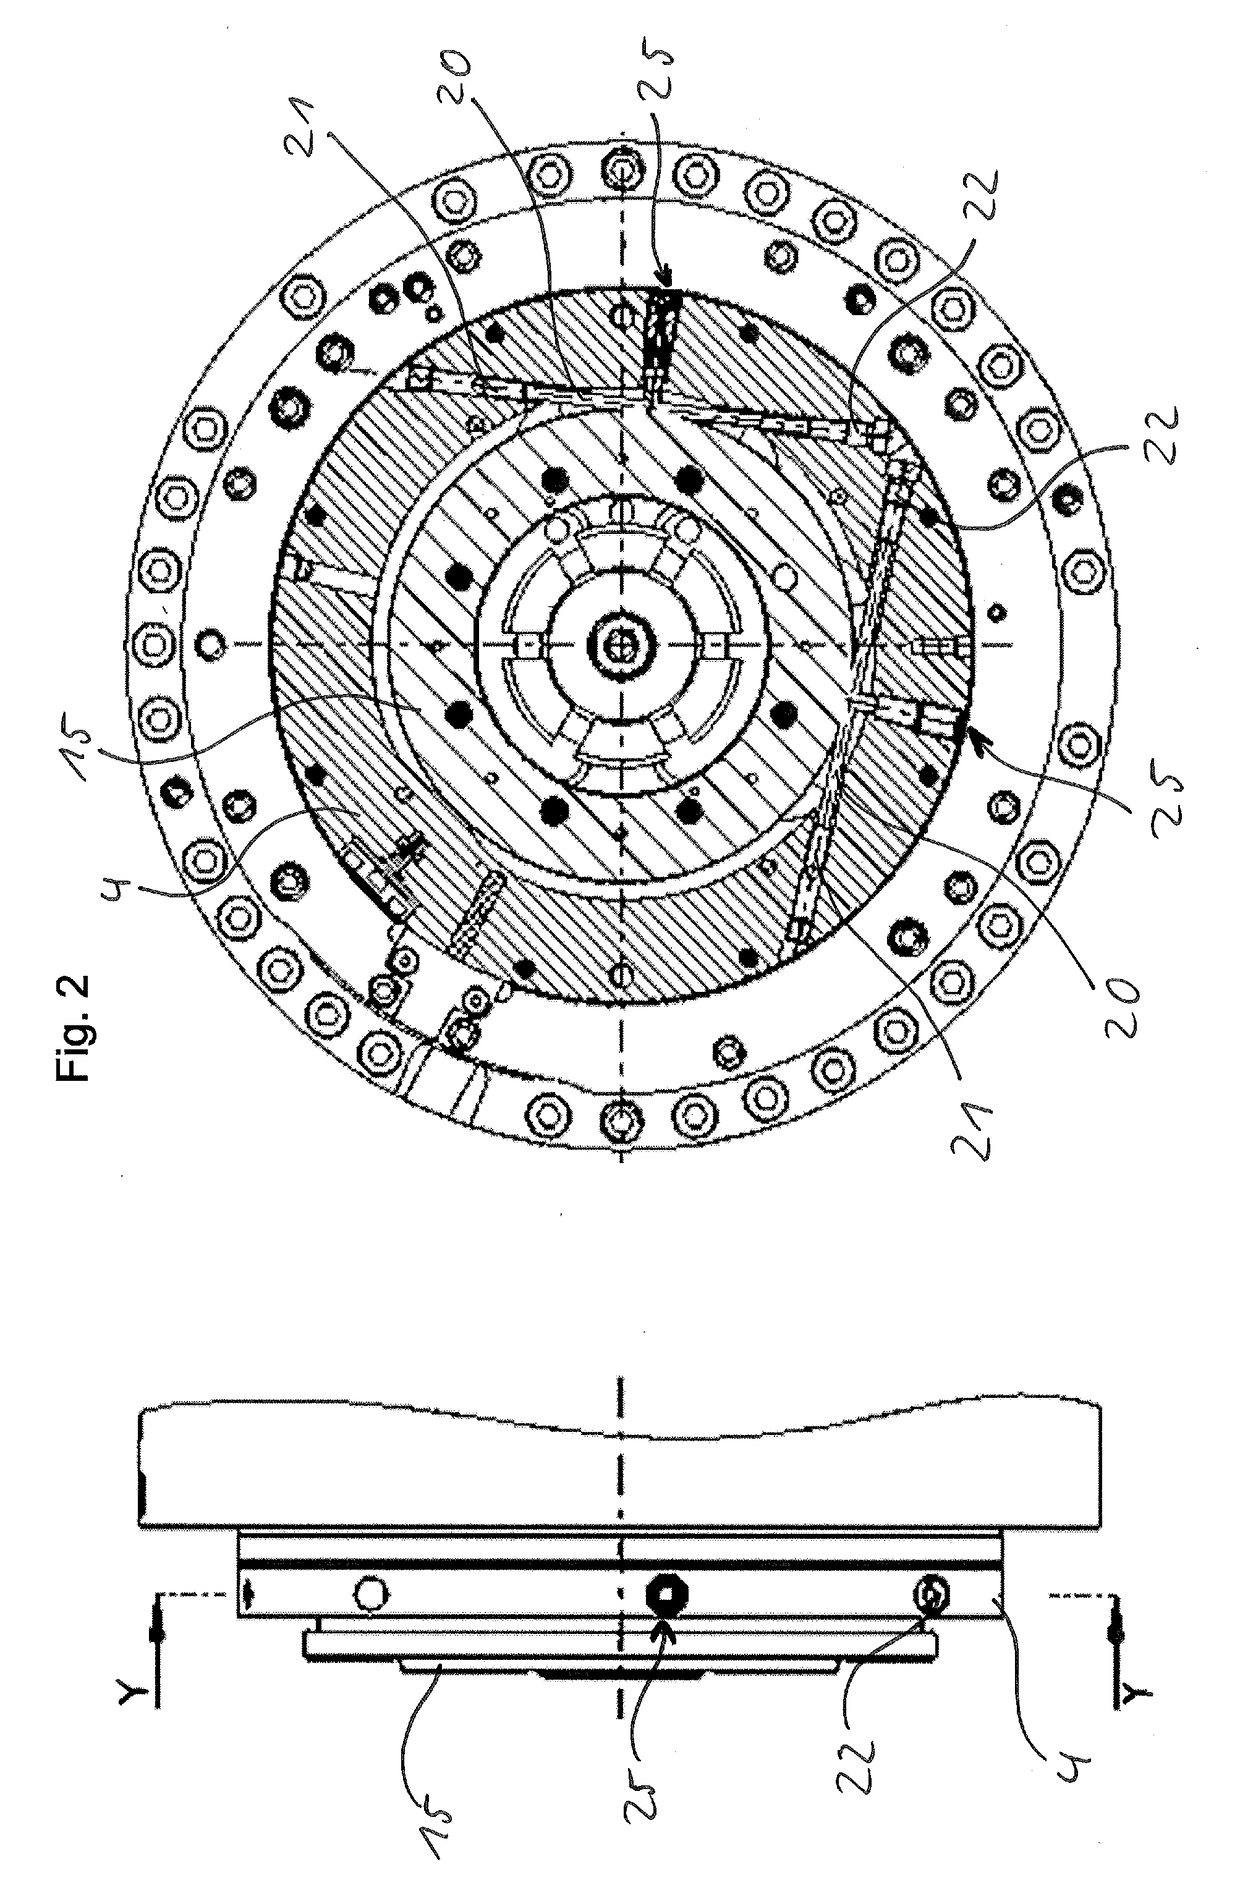 Spindle apparatus for use on a numerically controlled machine tool